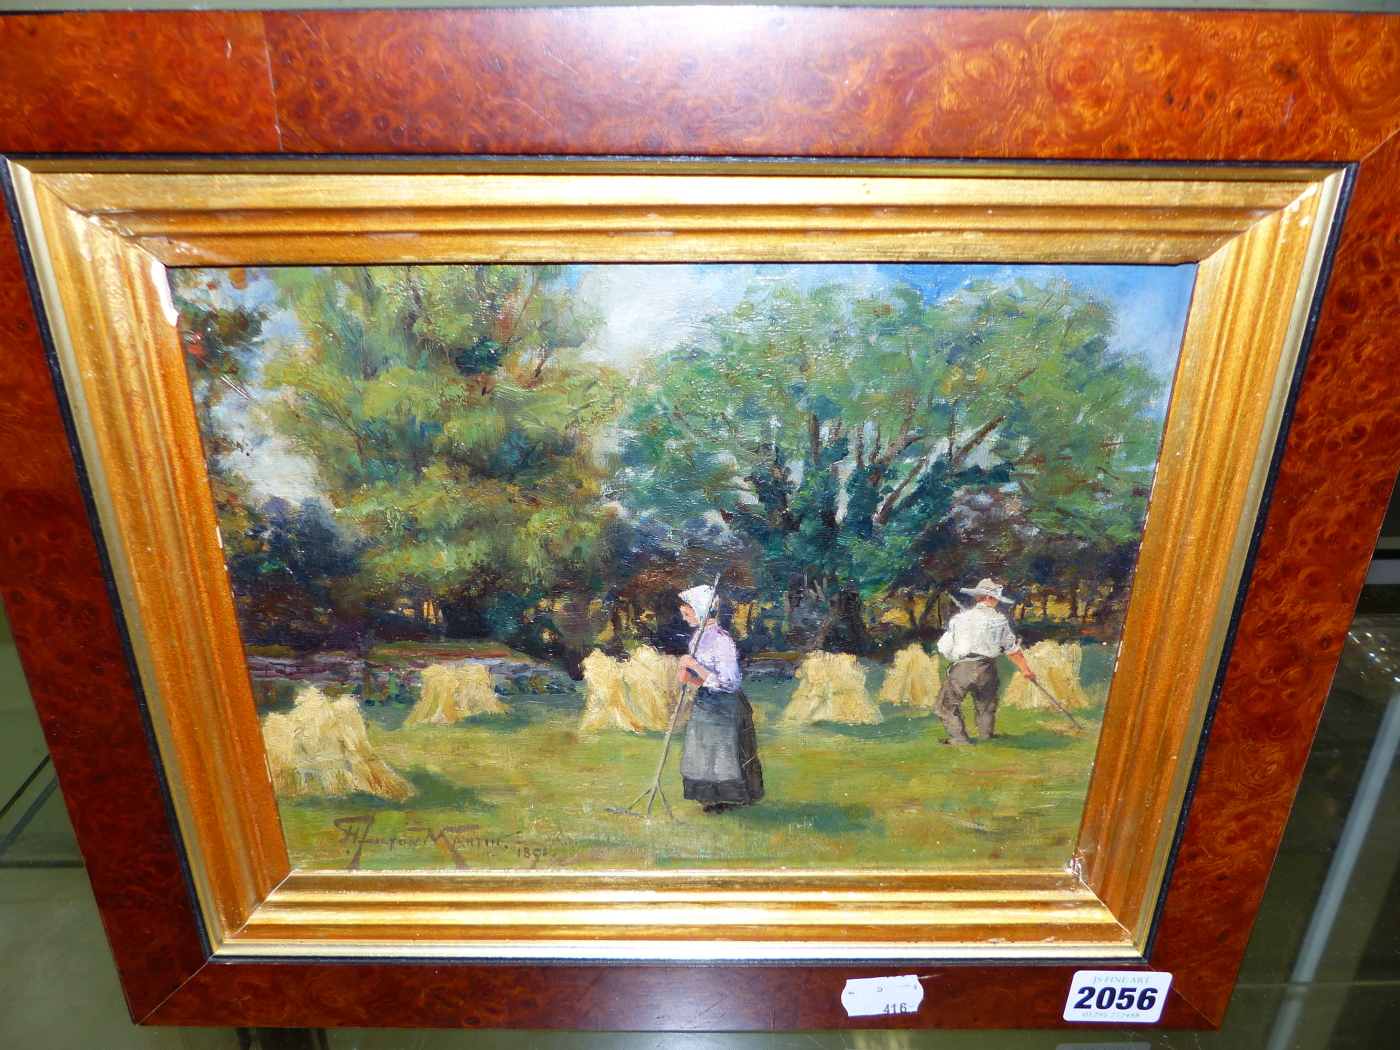 H. FULTON MARTIN. (19th/20th.C.SCHOOL) THE HARVEST, SIGNED AND DATED 1891, OIL ON CANVAS. 20 x - Image 2 of 5